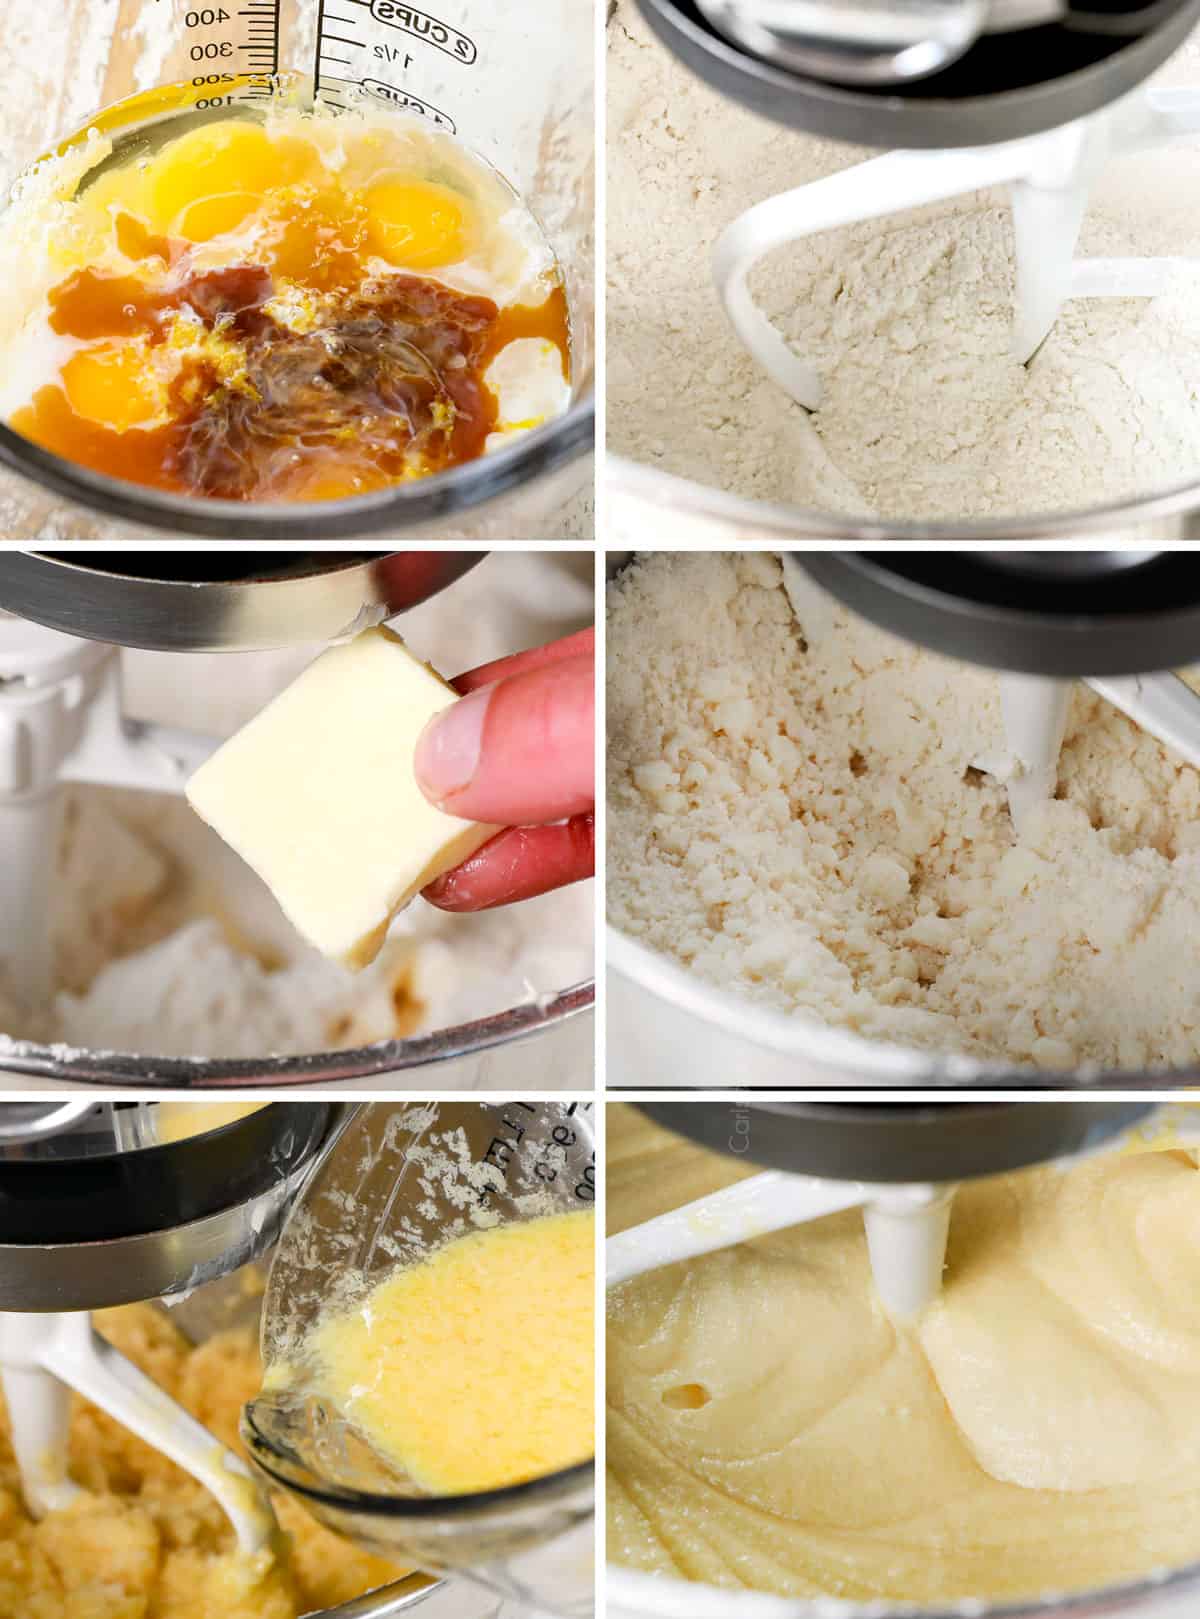 a collage showing how to make Chantilly cake recipe by 1) whisking wet ingredients together in a liquid measuring cup, 2) whisking dry ingredients together, 3) creaming butter and sugar, 4) beating in liquid measuring ingredients, 5) beating until fluffy